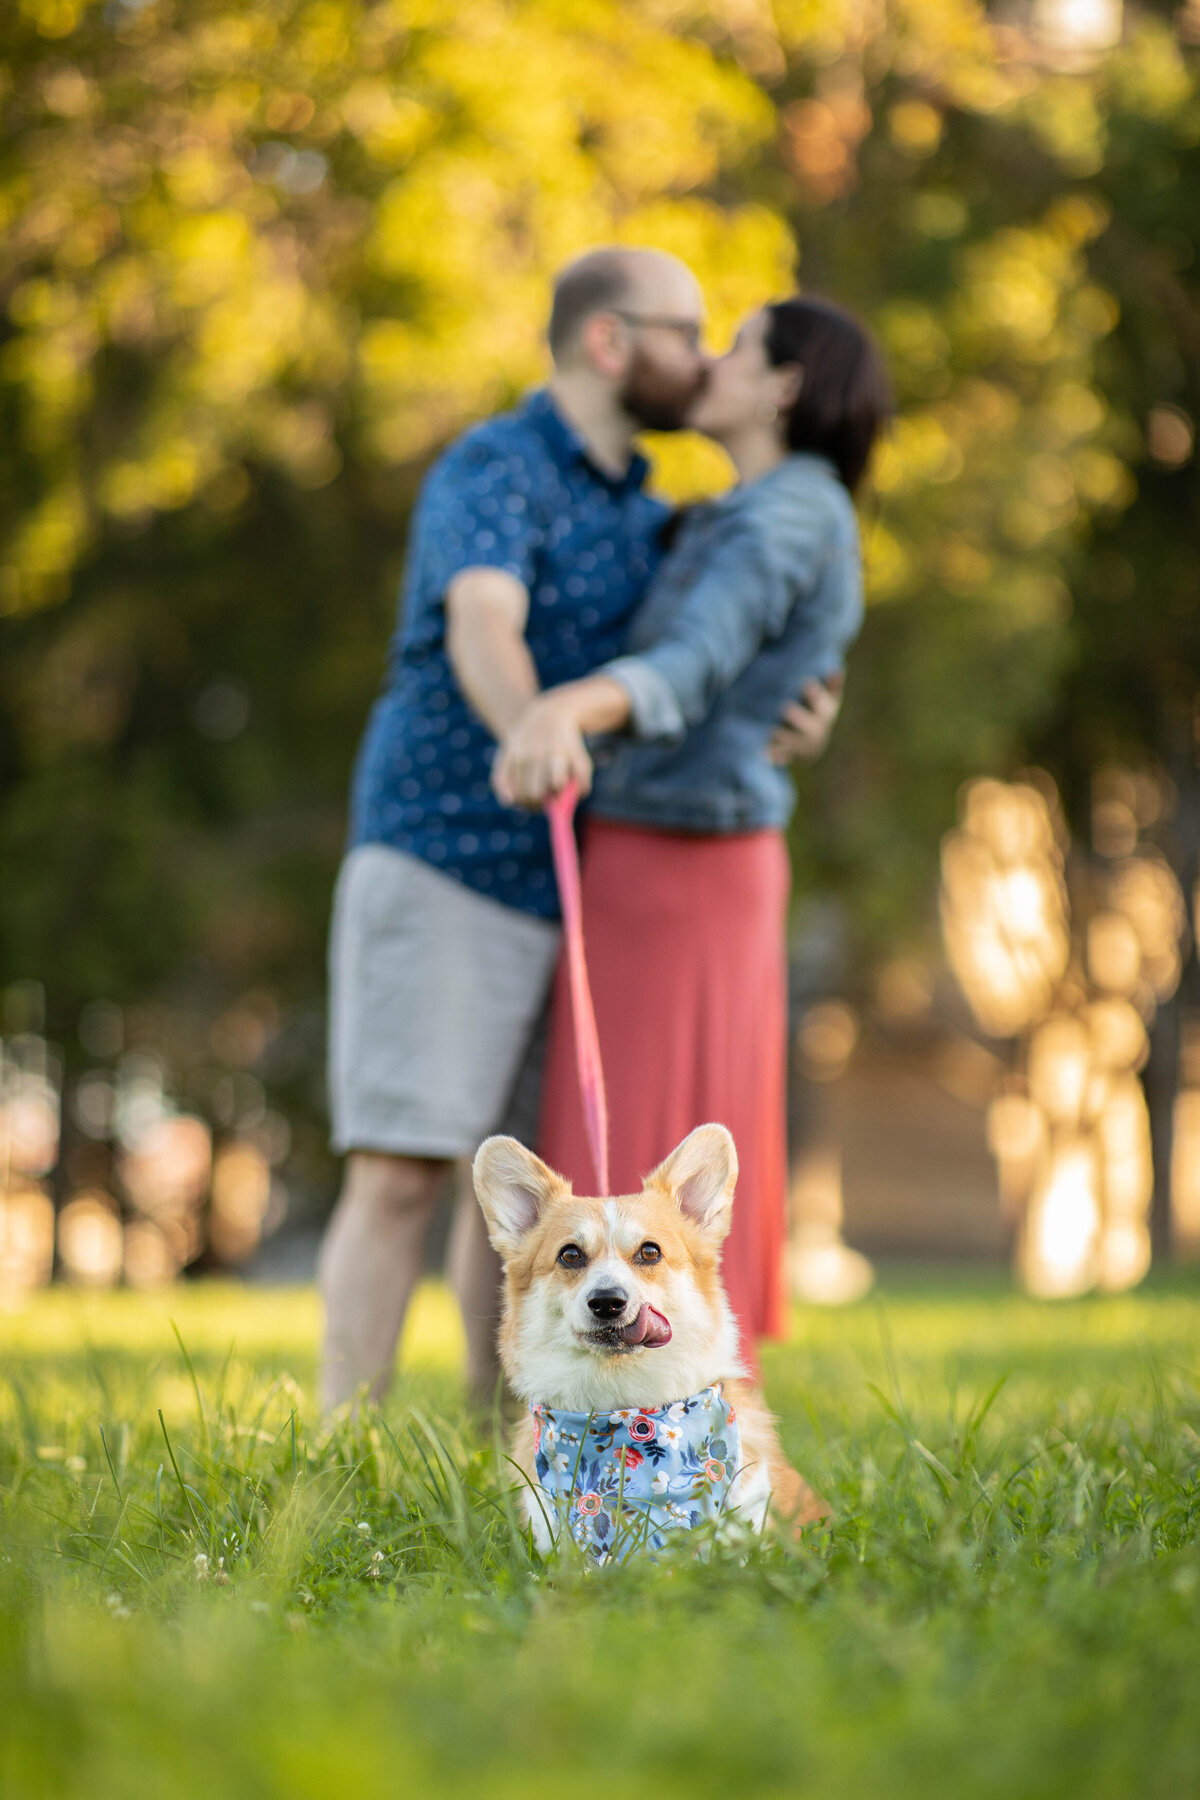 A small dog standing in the grass with the owners kissing behind them.